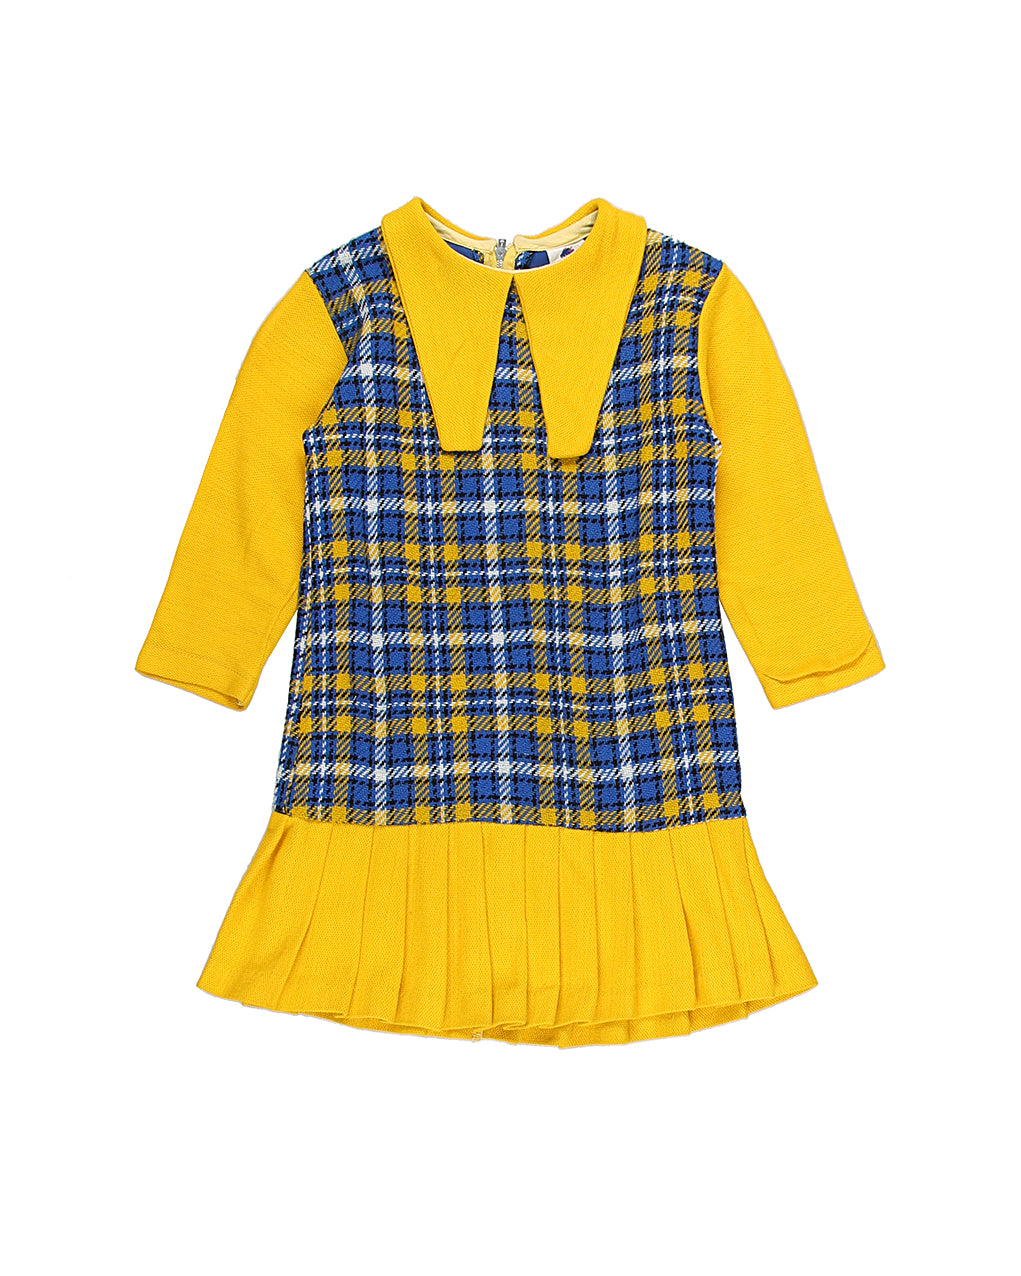 Vintage 1960s 'Little Beauty' Yellow and Blue Checked Dress - Age 7-8